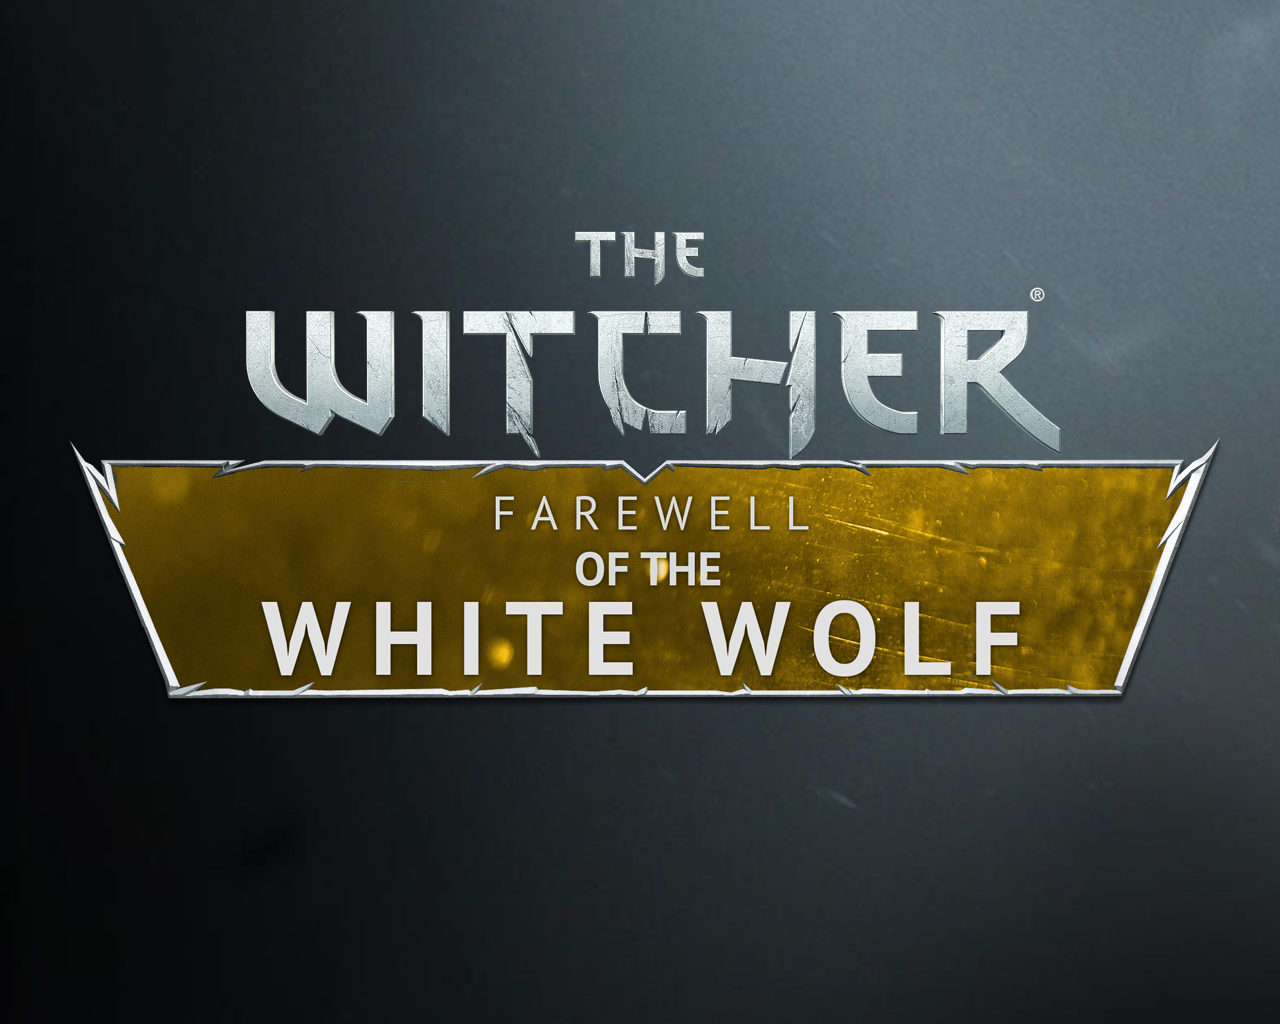 farewell of the white wolf